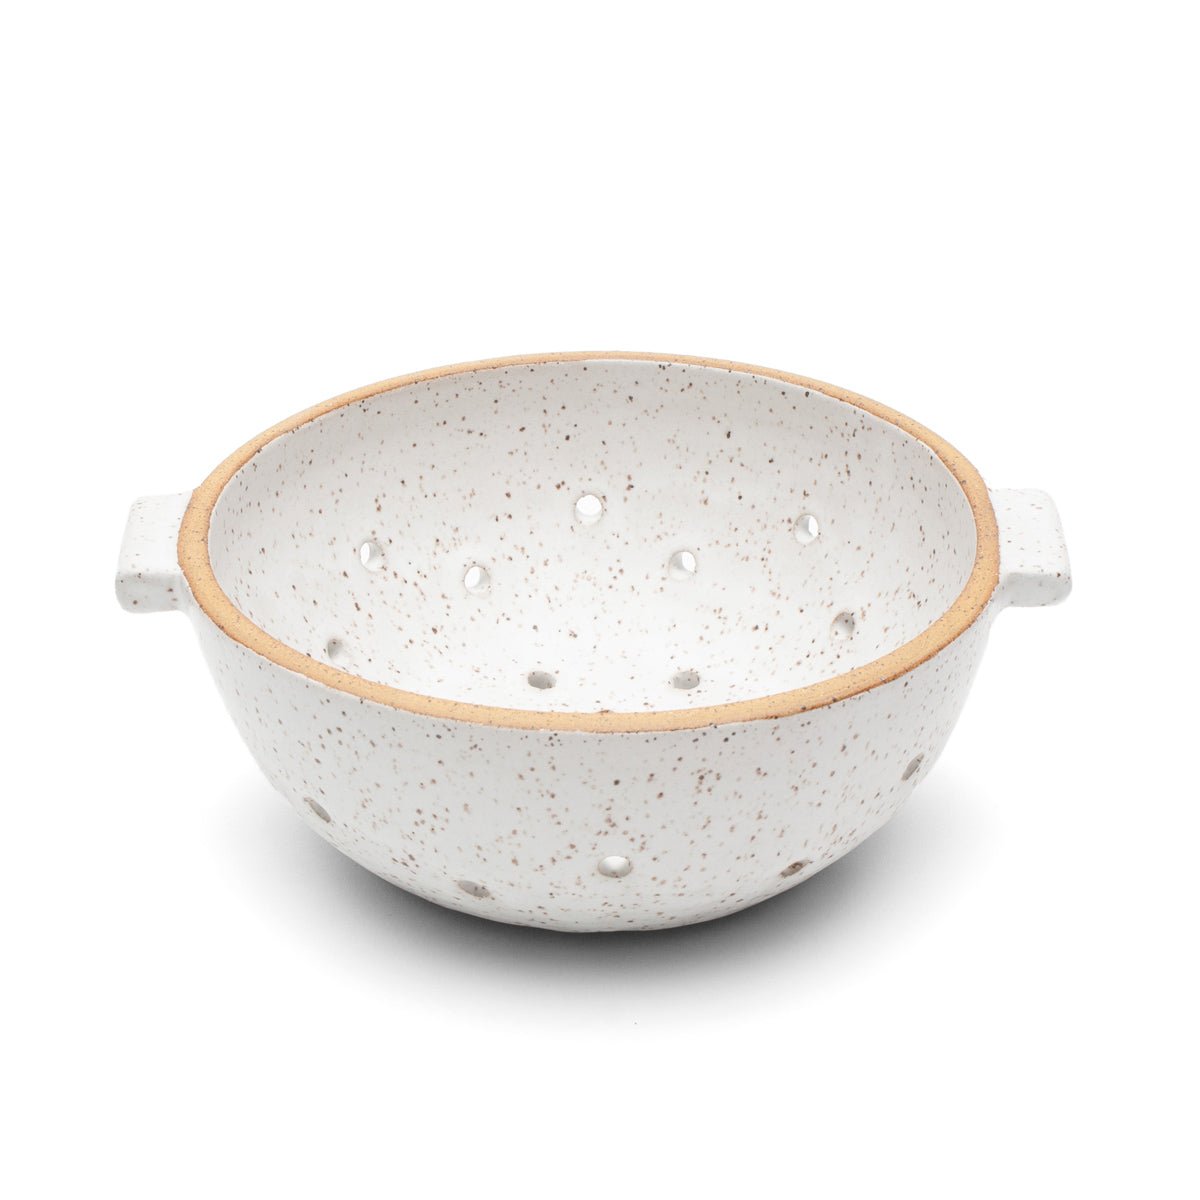 Speckled ceramic colander glazed in a matte white finish with an exposed natural clay edge. The White Colander is designed and handmade by Byun Ceramics in Portland, OR.